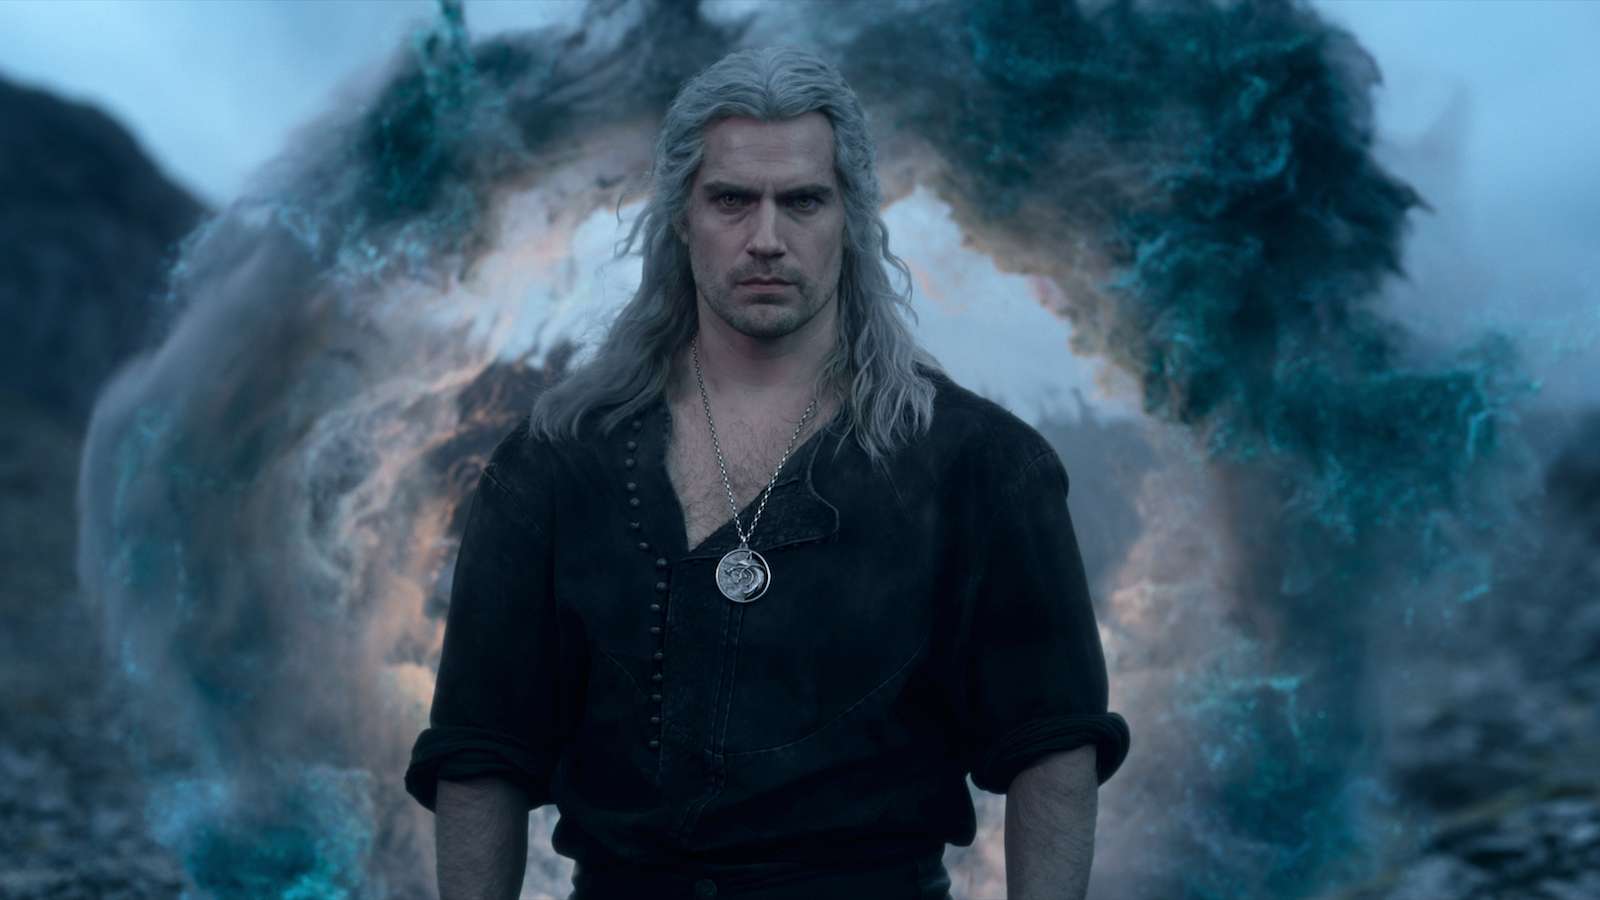 A close up of Henry Cavill as Geralt of Rivia in The Witcher